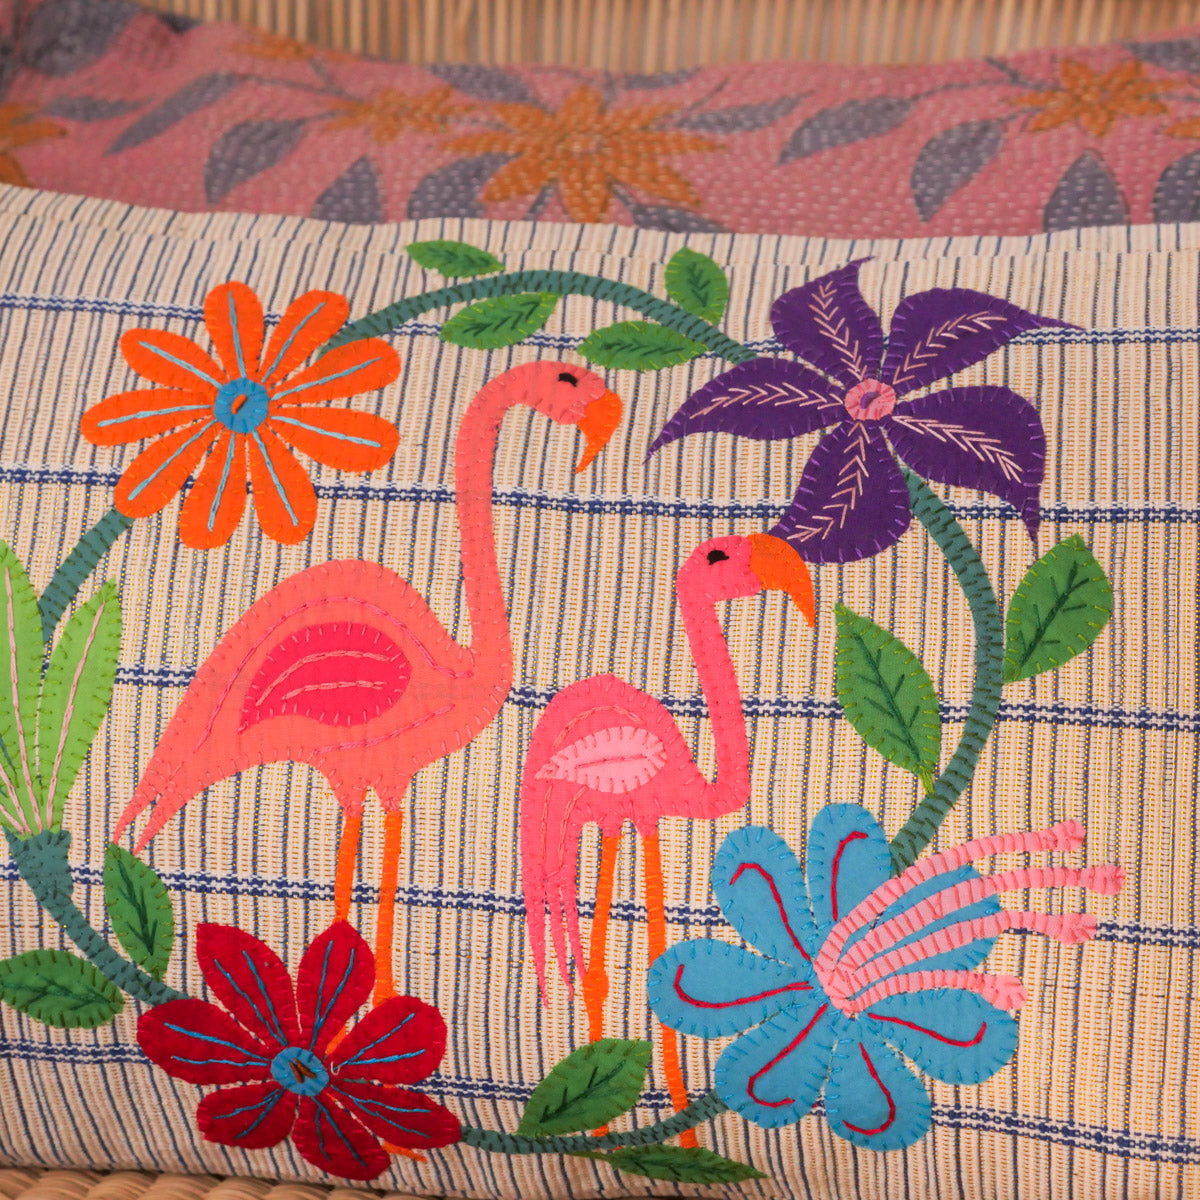 A unique collage of flamingos and flowers, in appliqué and embroidery on a hand loomed cotton cushion